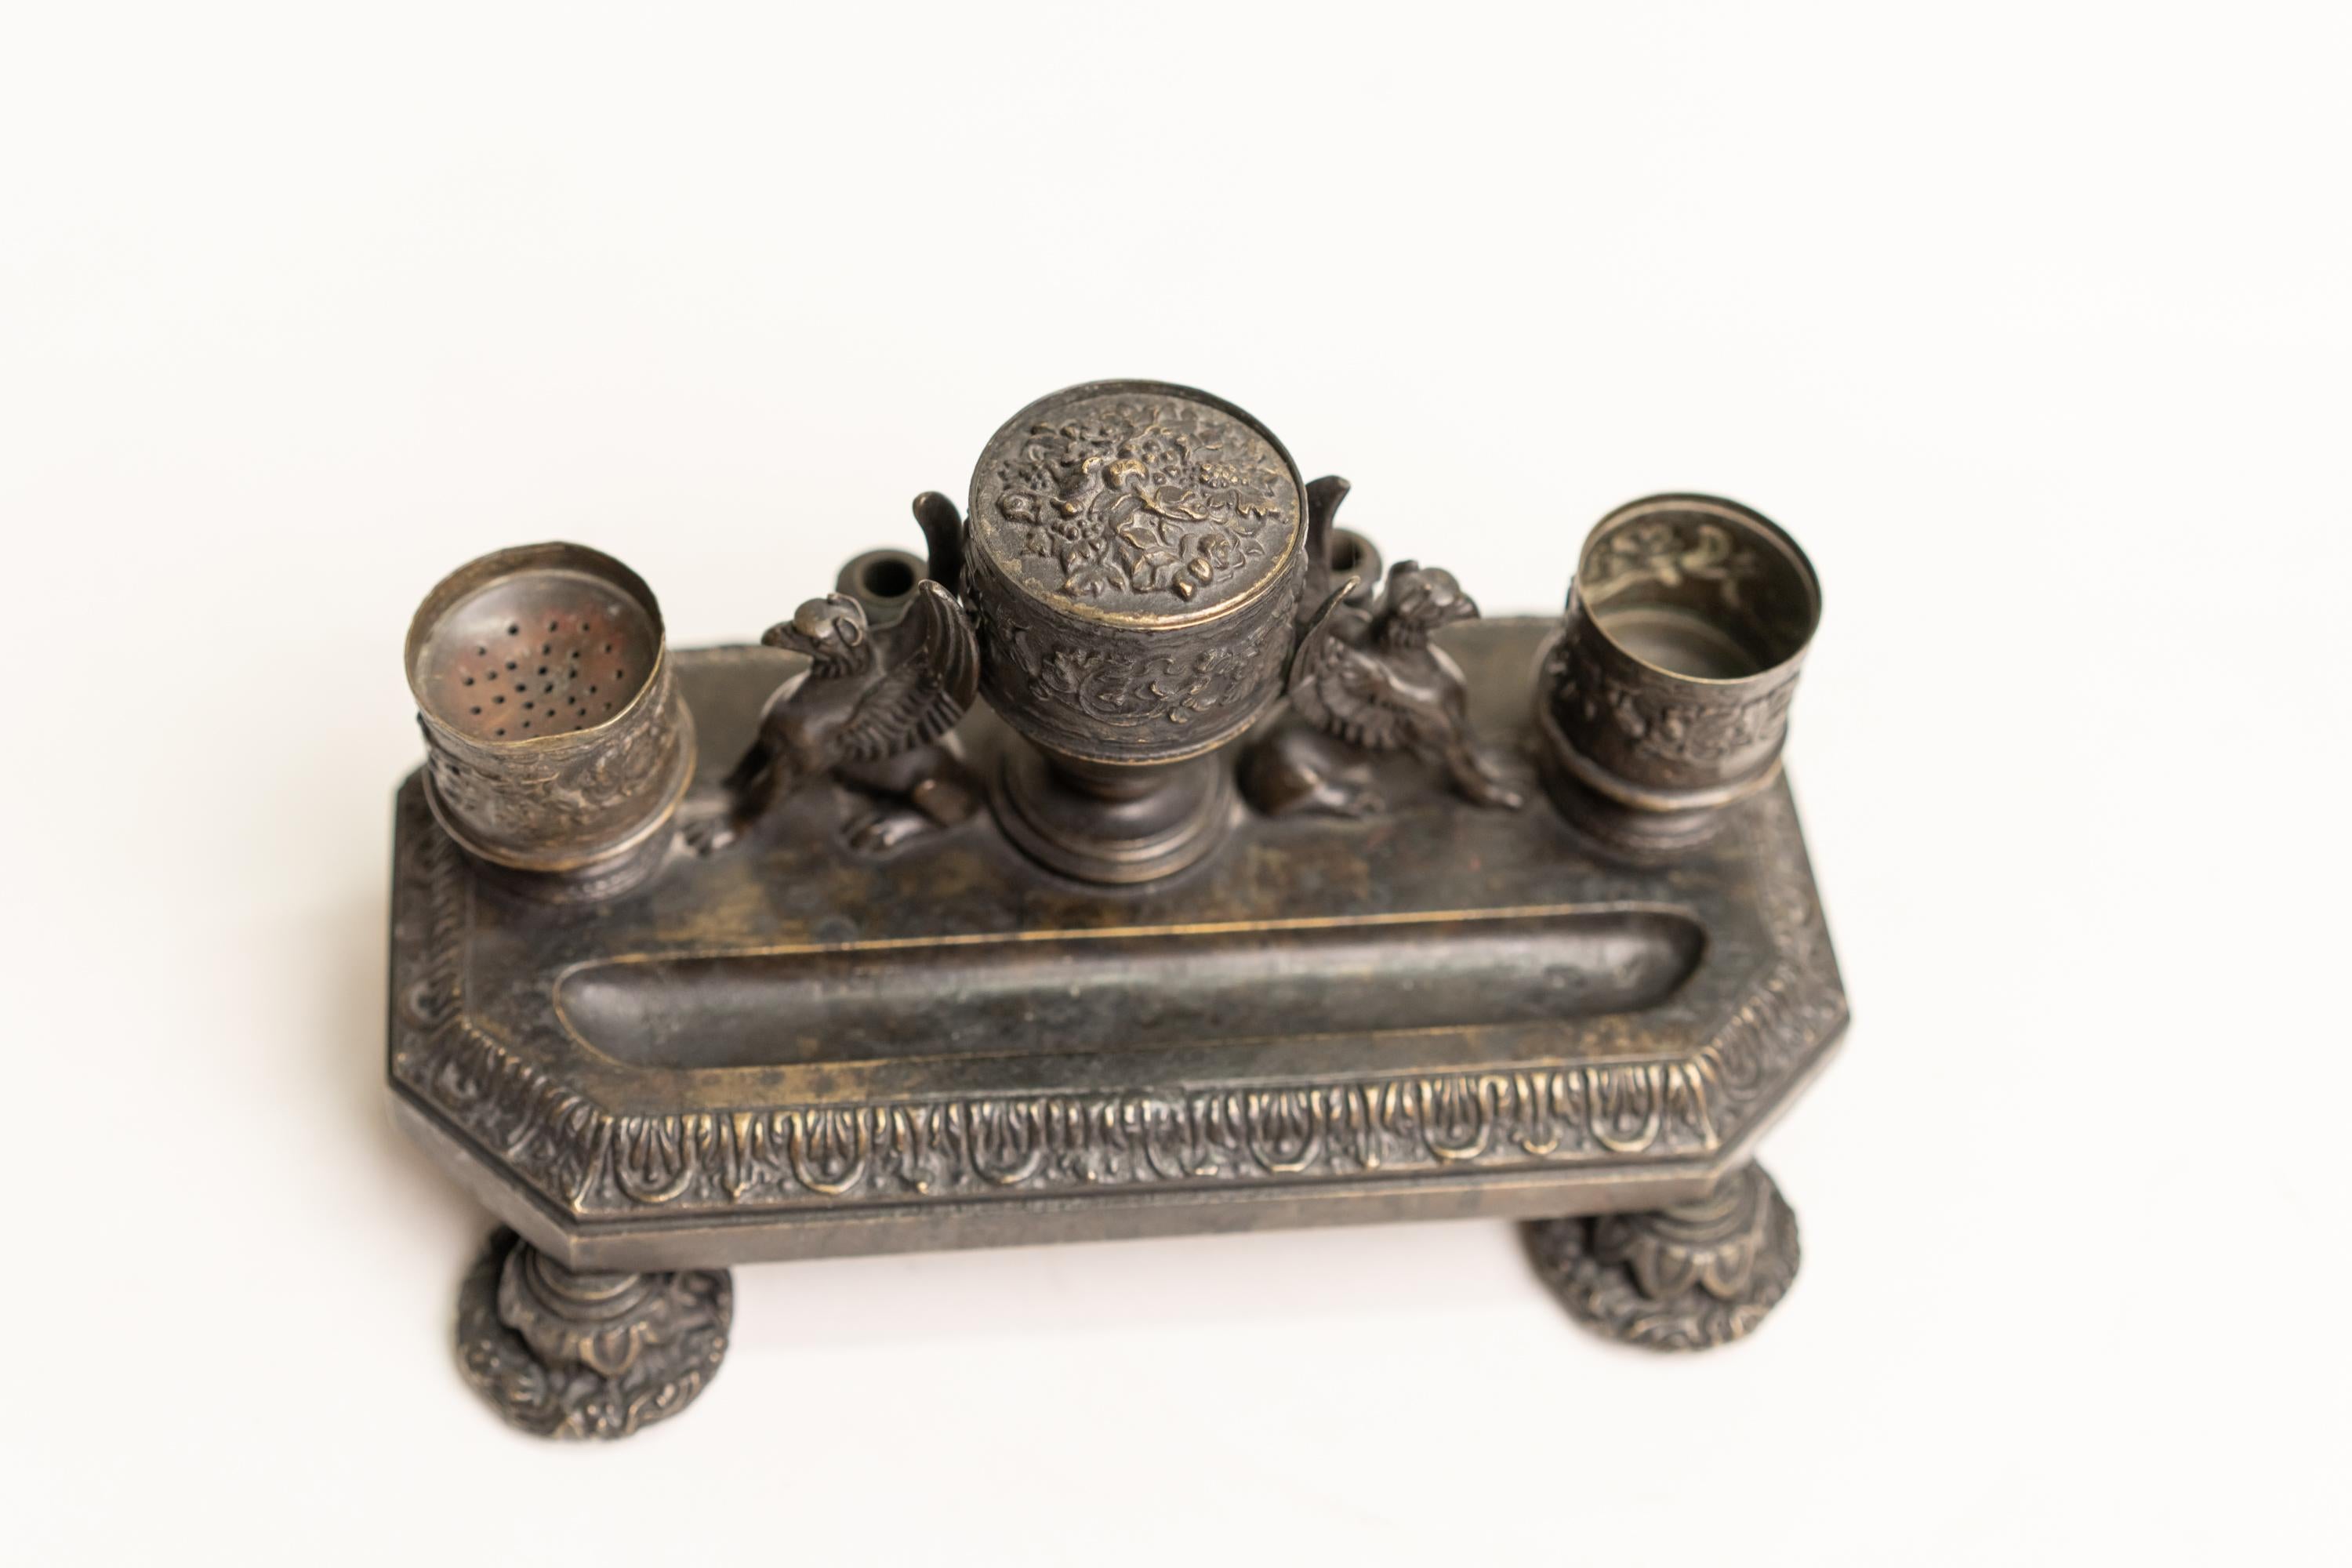 Renaissance Revival Renaissance Style Bronze Inkwell Decorated with Gryphons